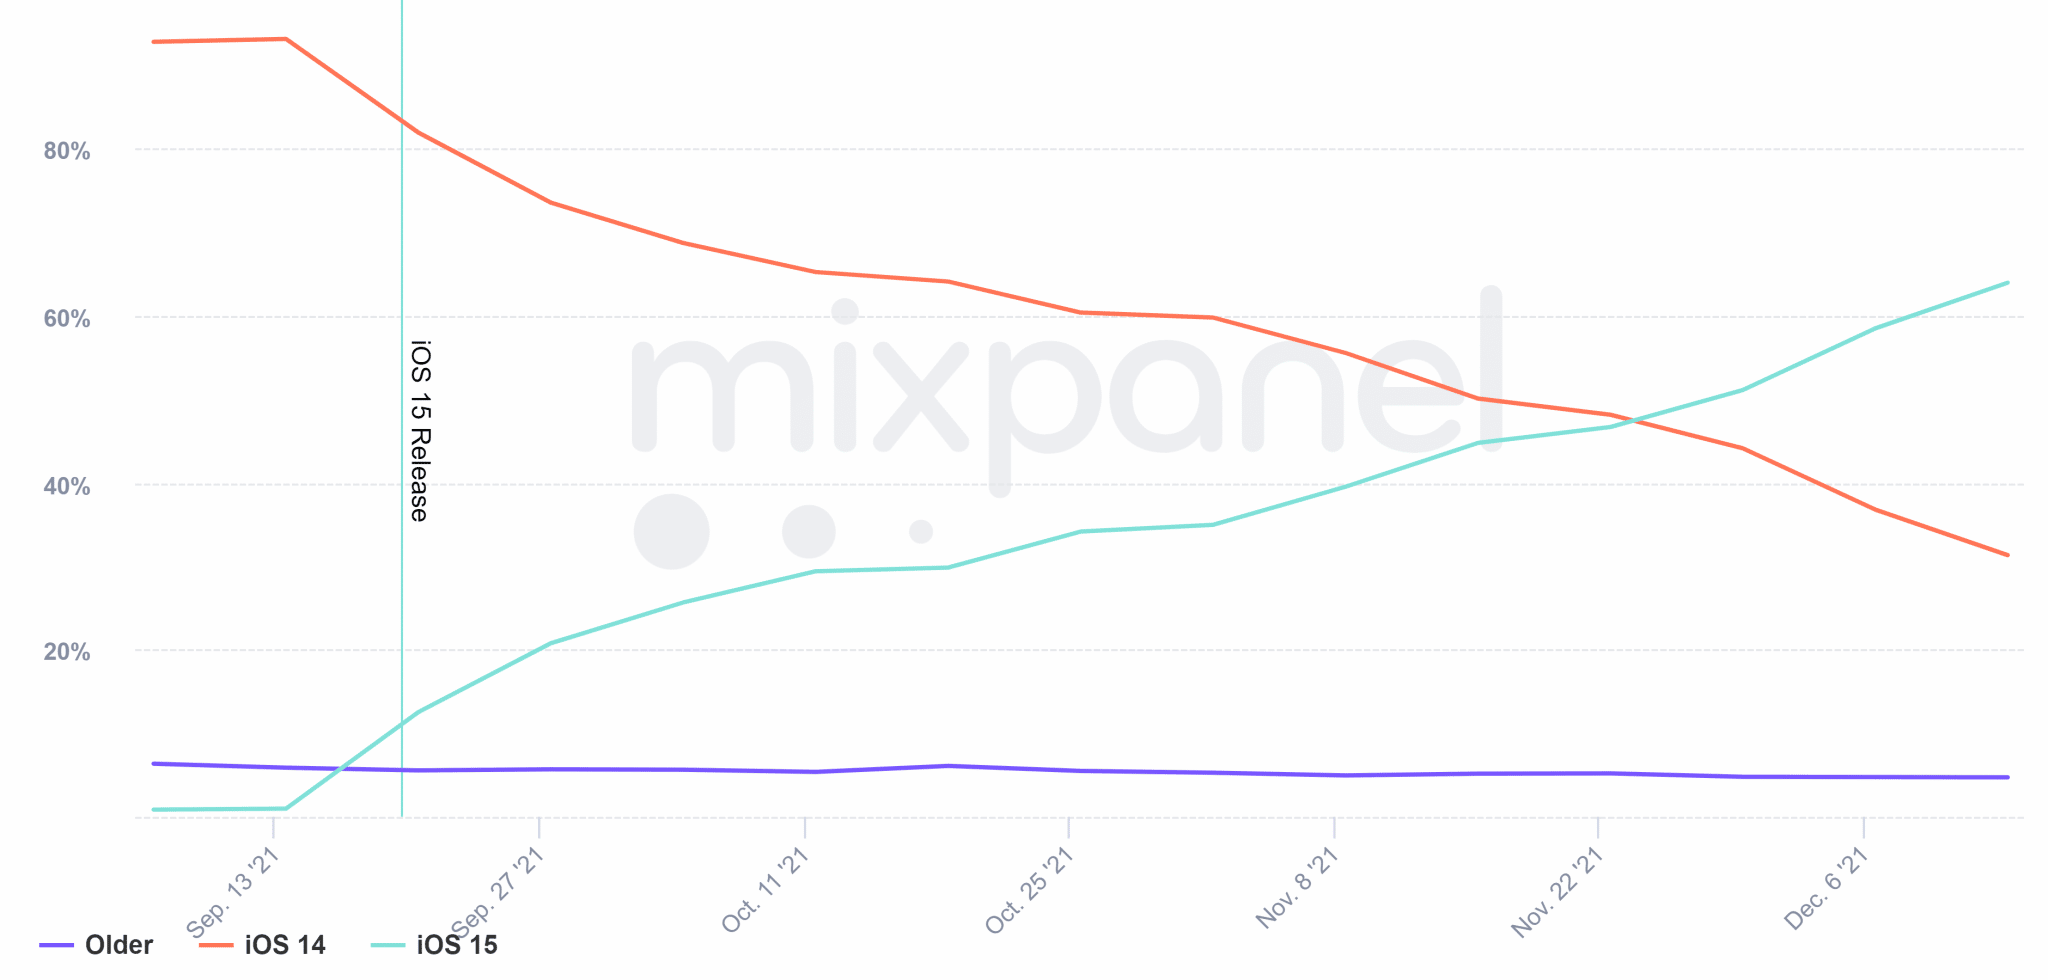 Trends report by Mixpanel - iOS 15 adoption